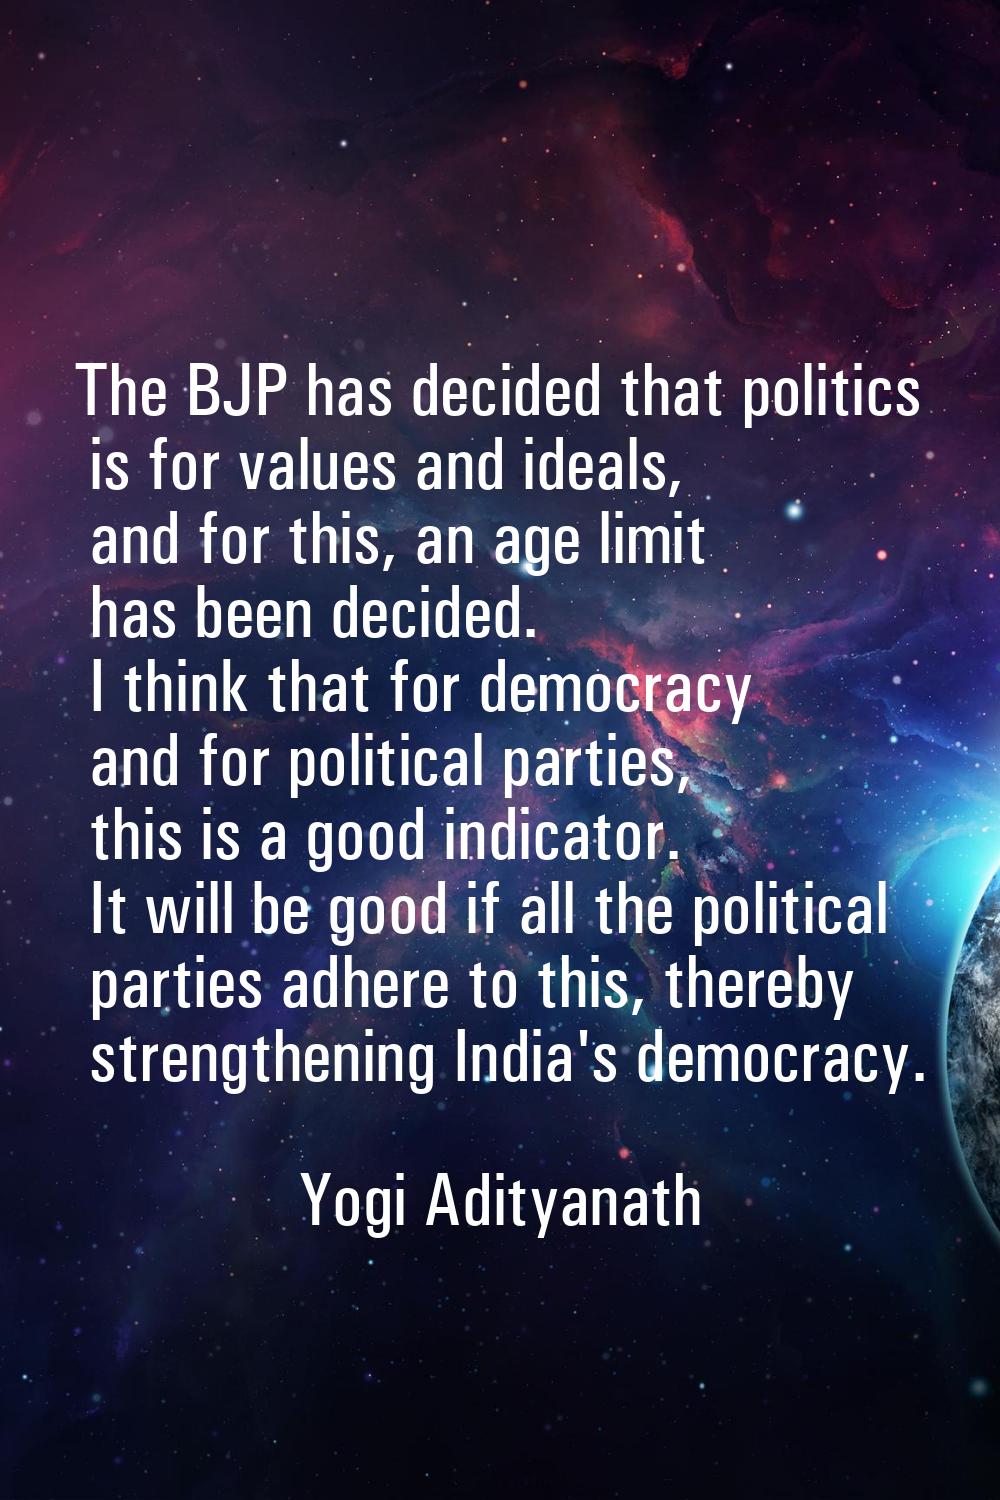 The BJP has decided that politics is for values and ideals, and for this, an age limit has been dec